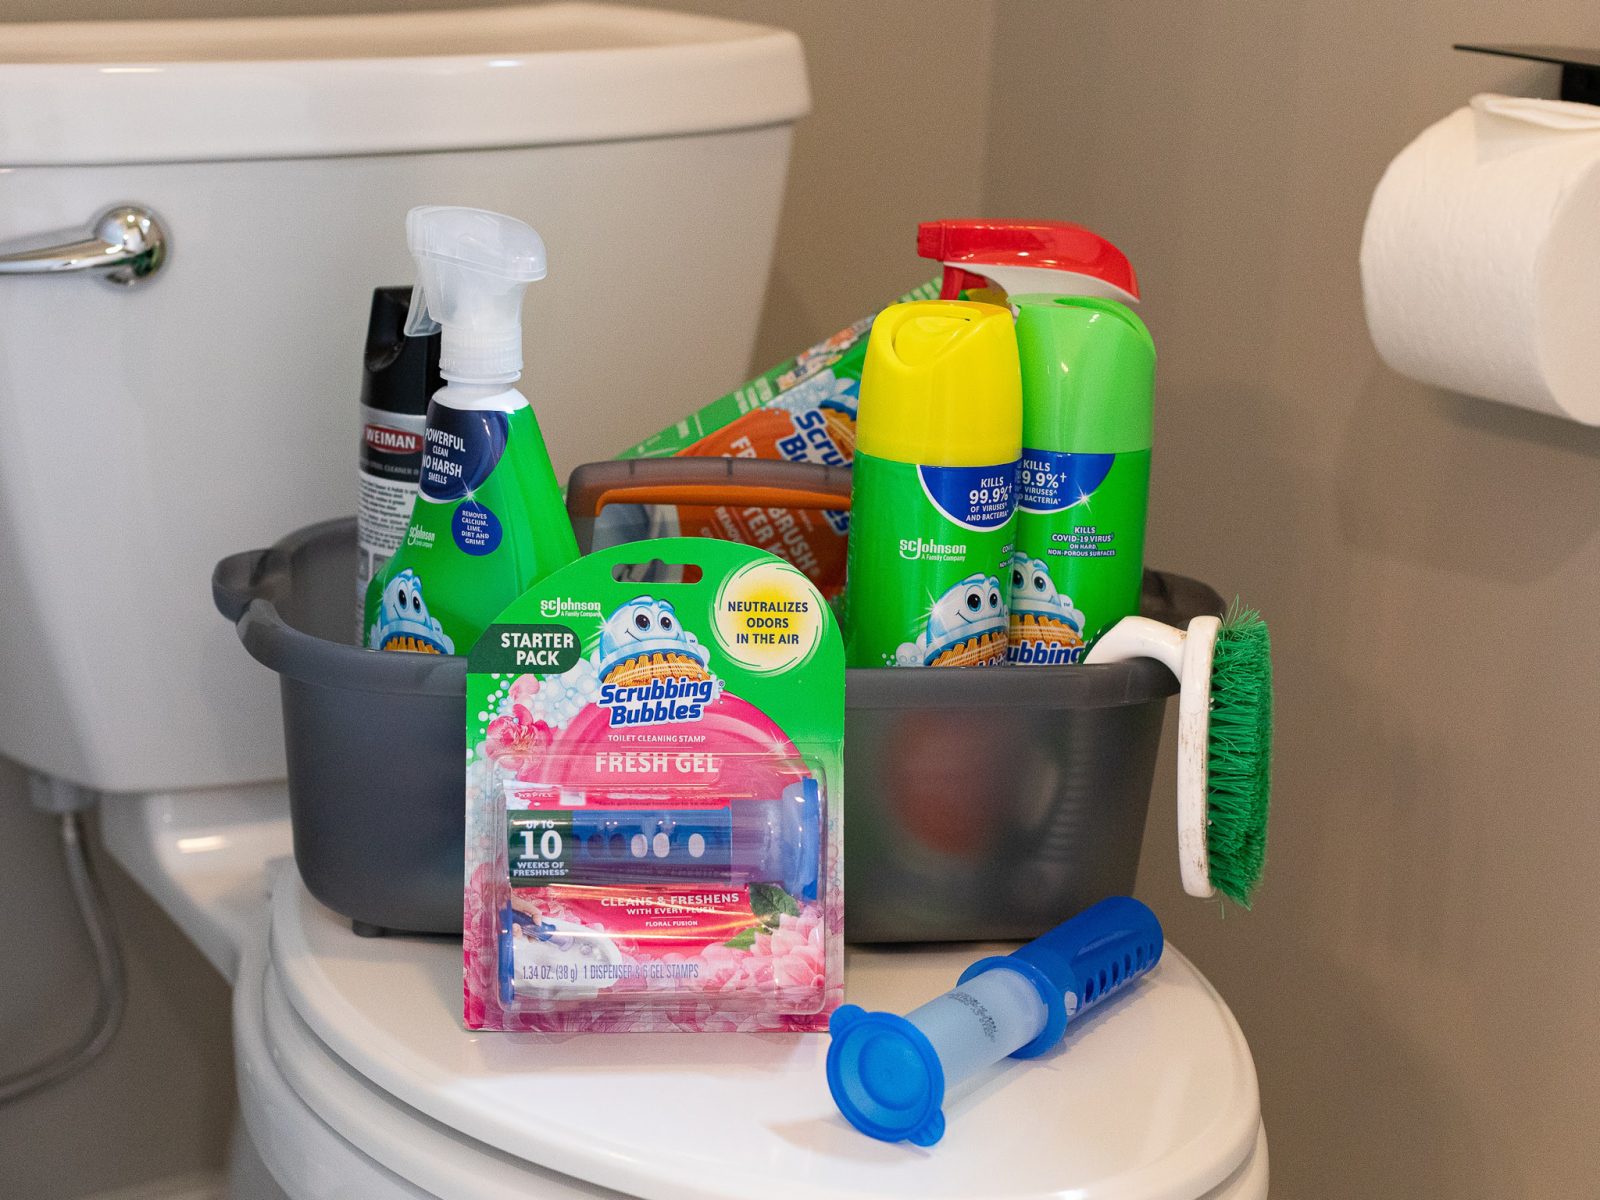 Get A Jump On Spring Cleaning & Save On Scrubbing Bubbles® Products NOW At Publix